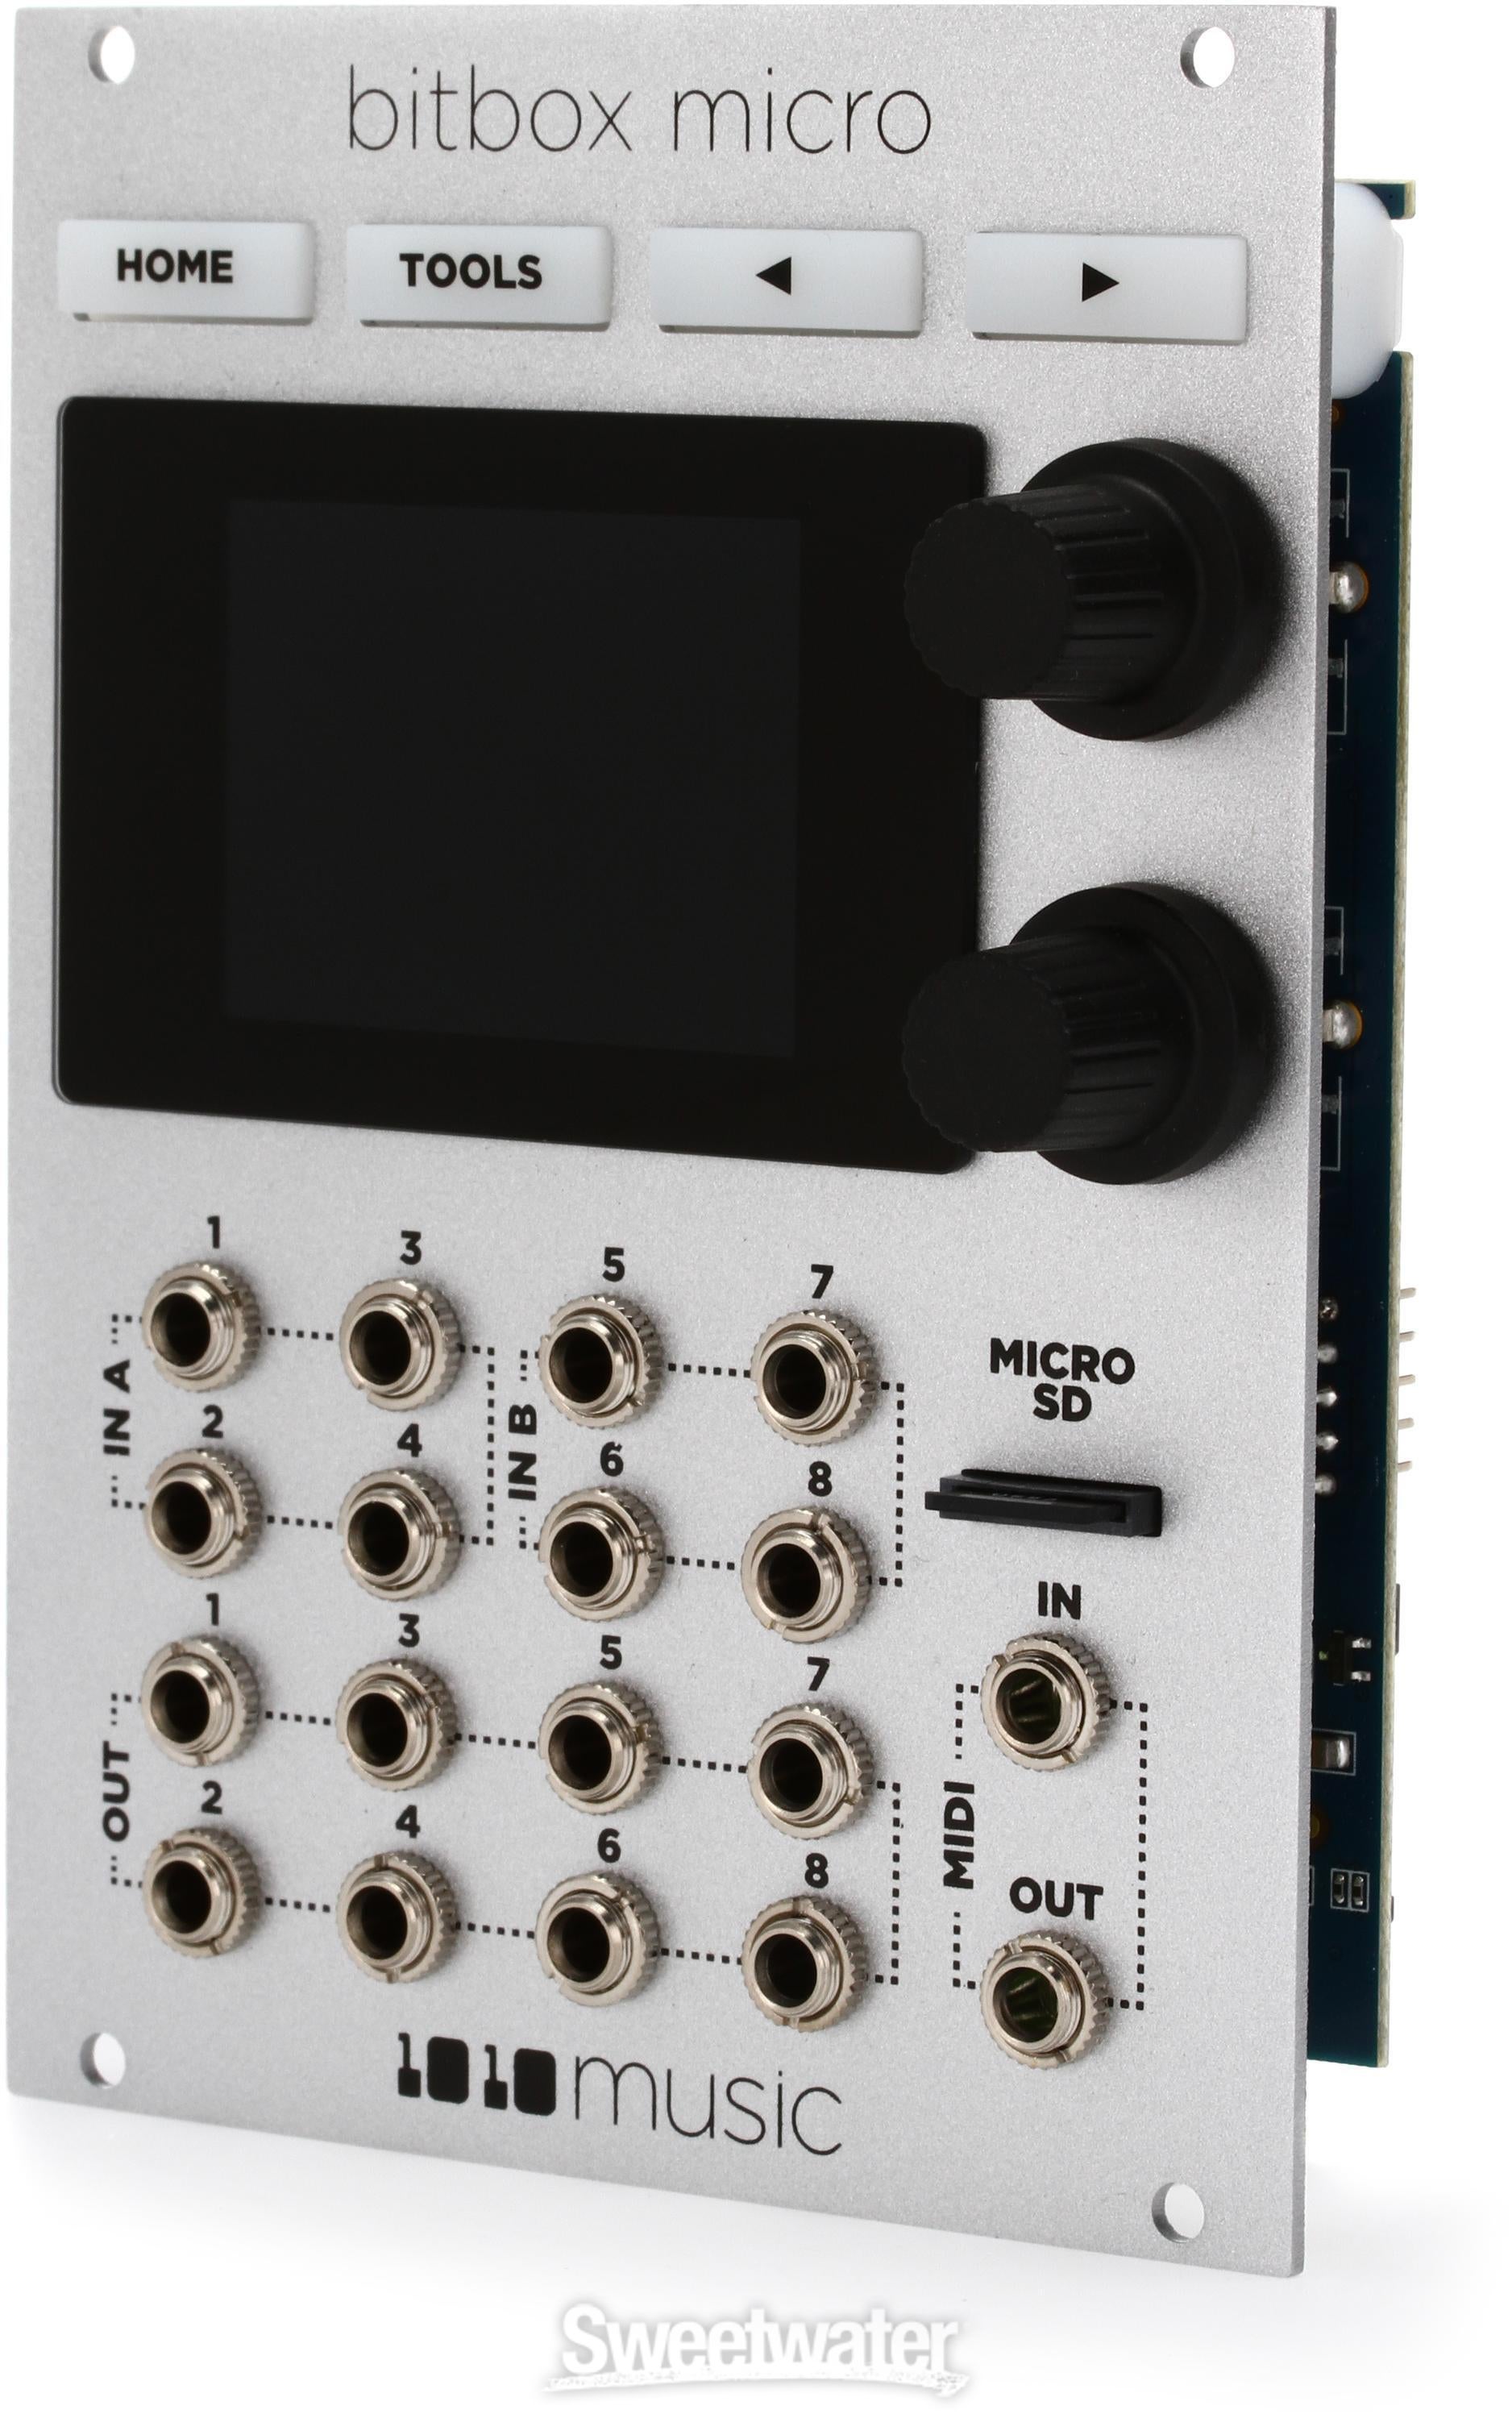 1010music Bitbox Micro Eurorack Compact Sampler with Touchscreen - White